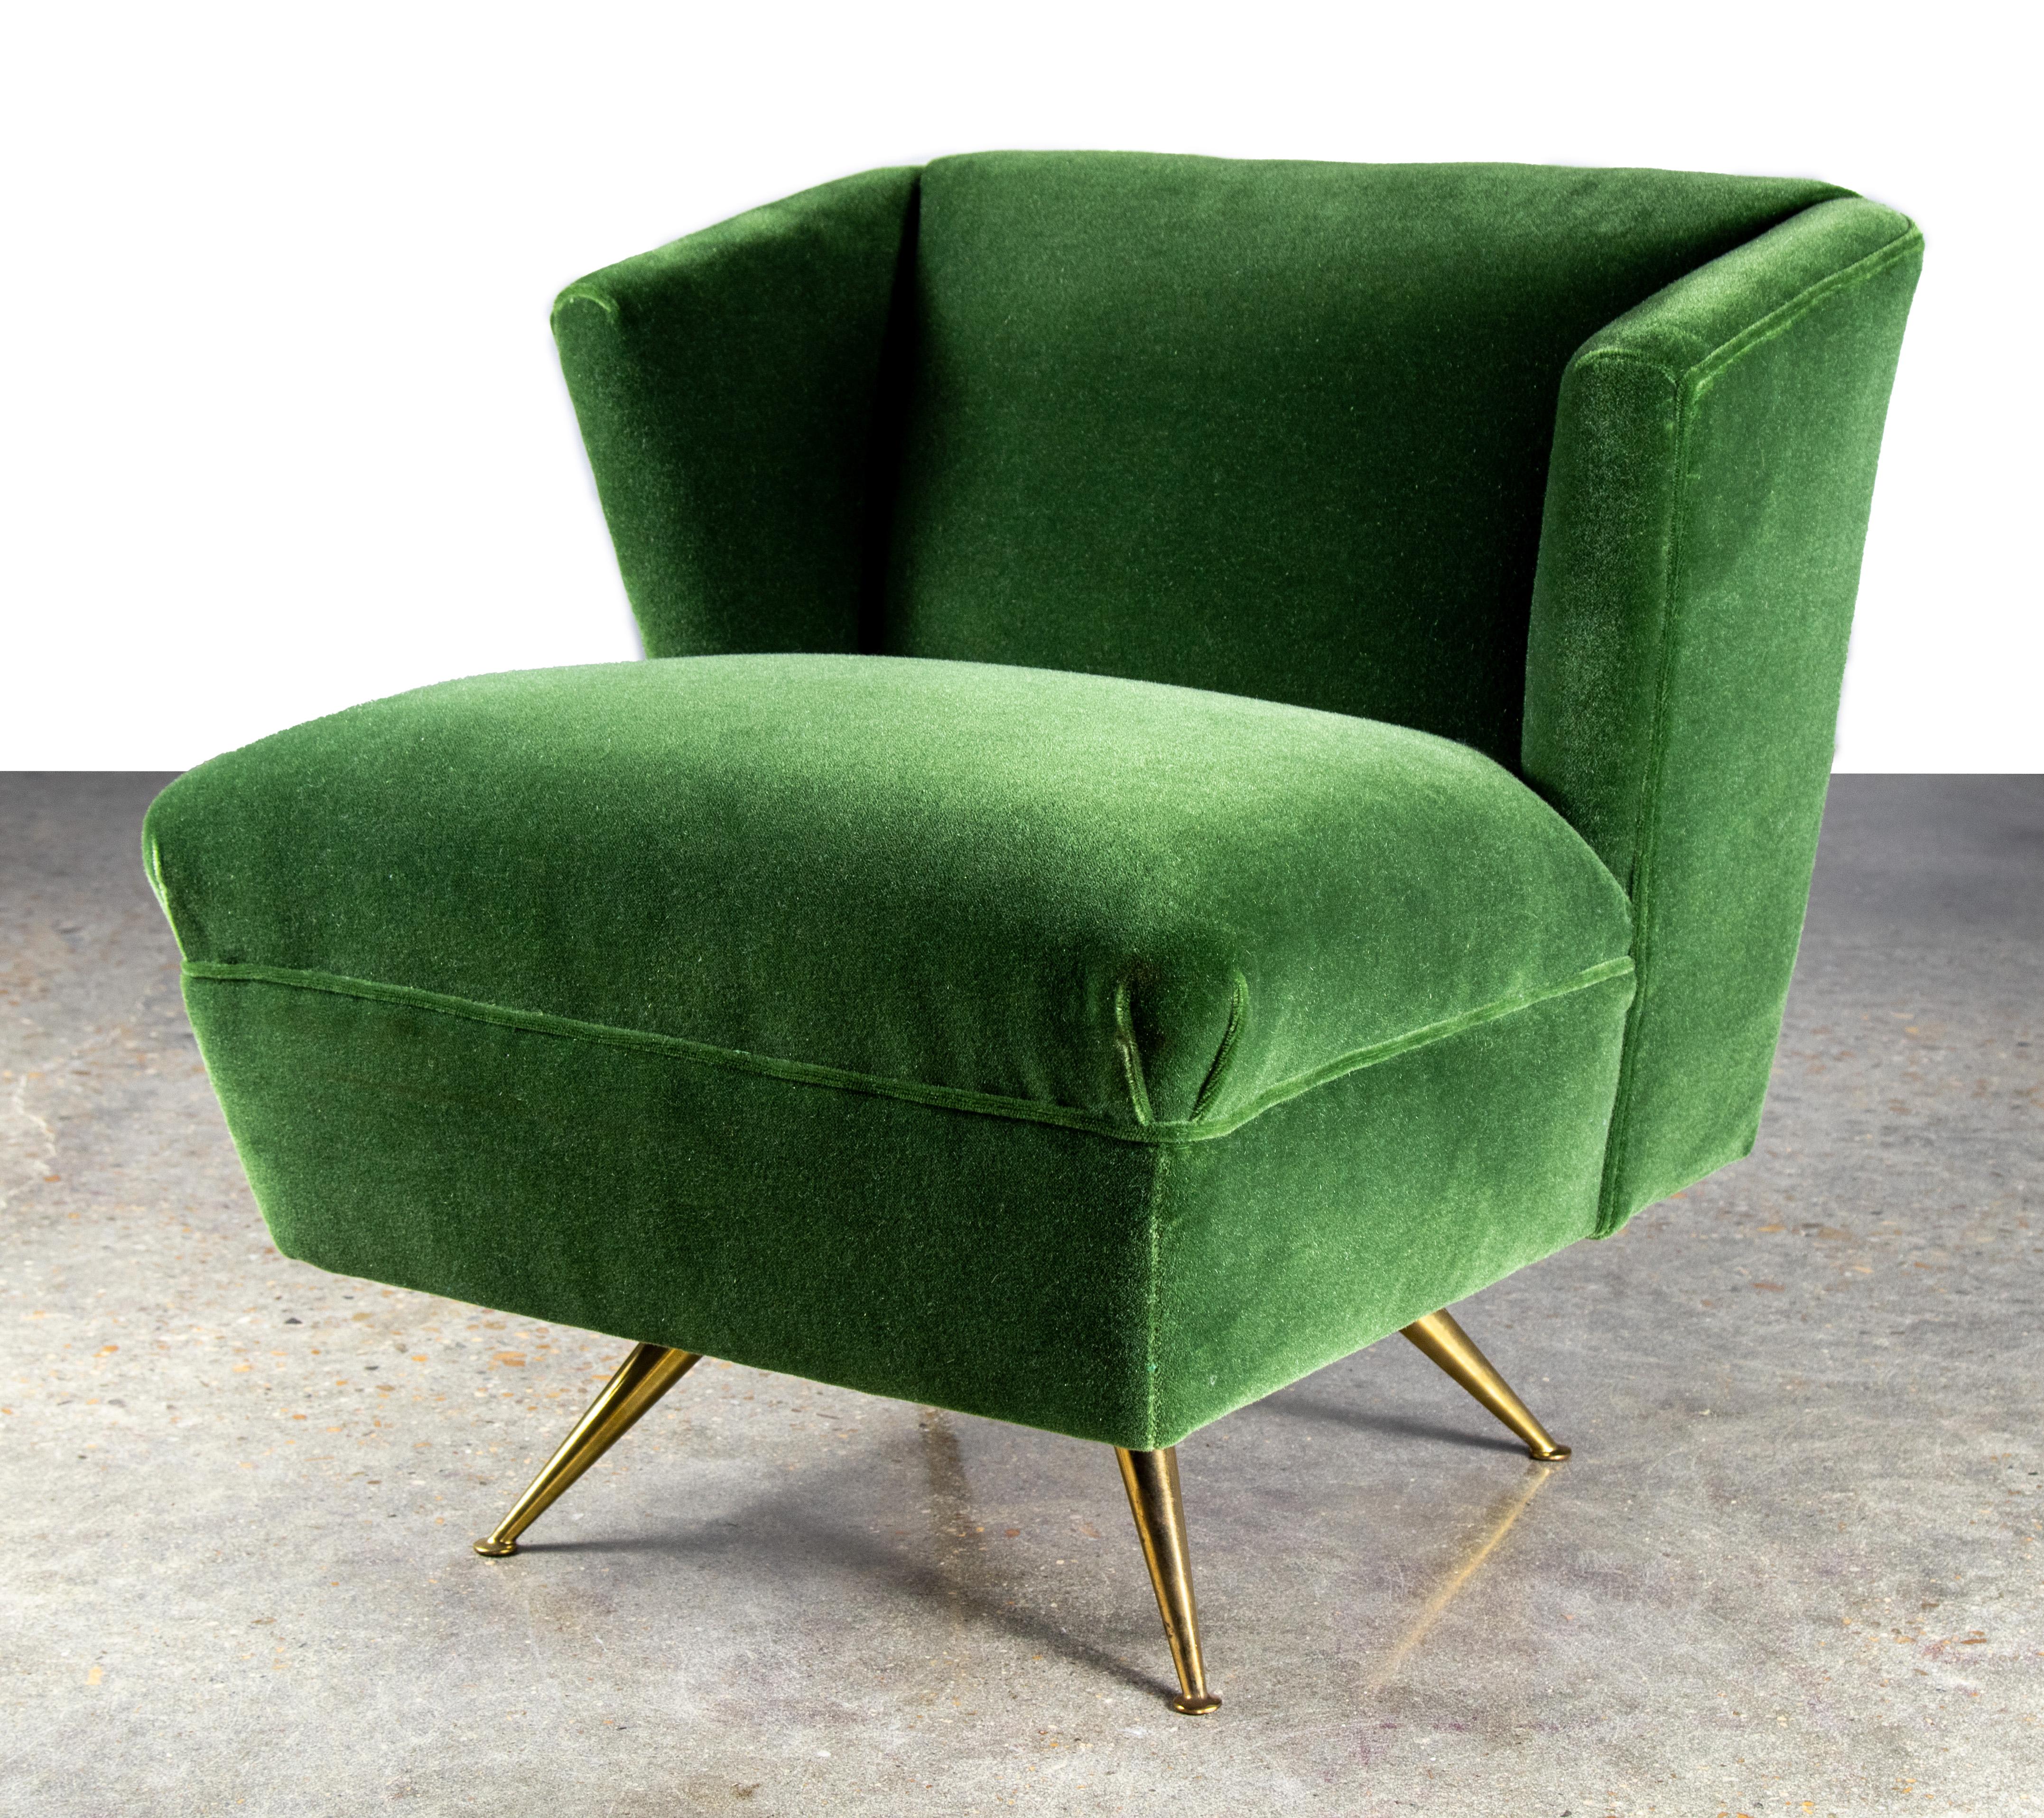 Mid-Century Modern 1950s Henry P Glass Swivel Lounge Chair Green Mohair on brass legs JL Chase Co. For Sale